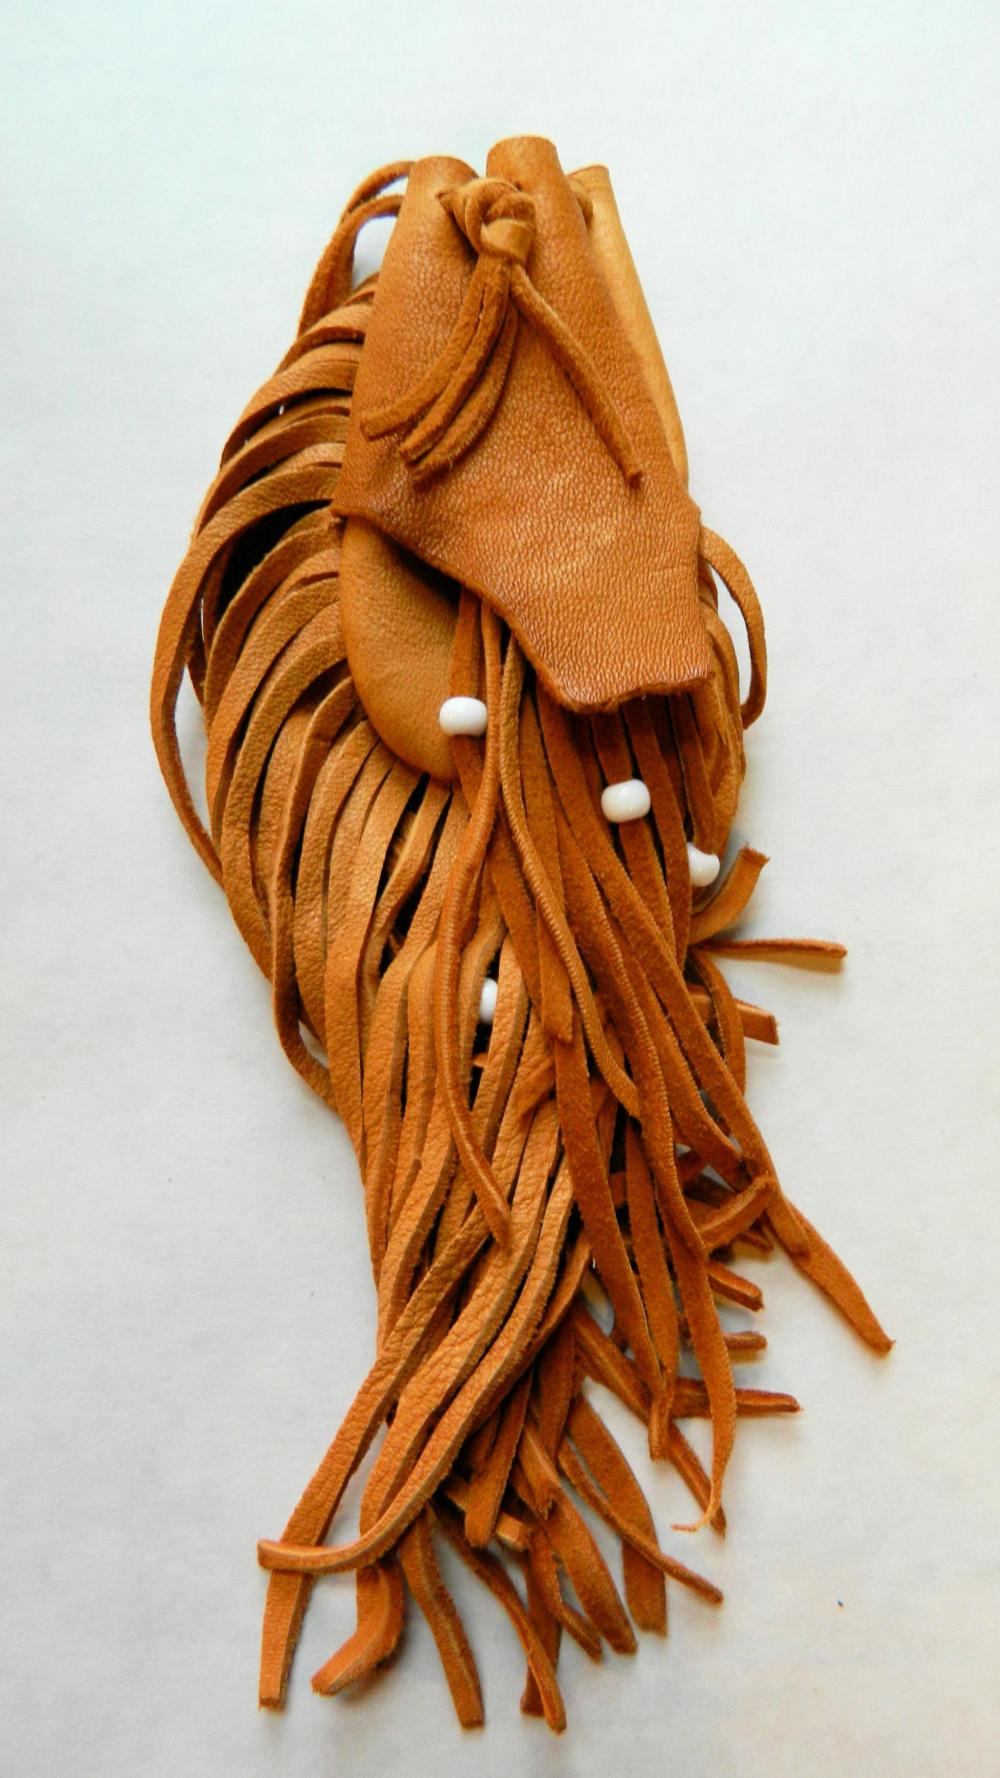 Acorn Color Fringed Leather Pouch